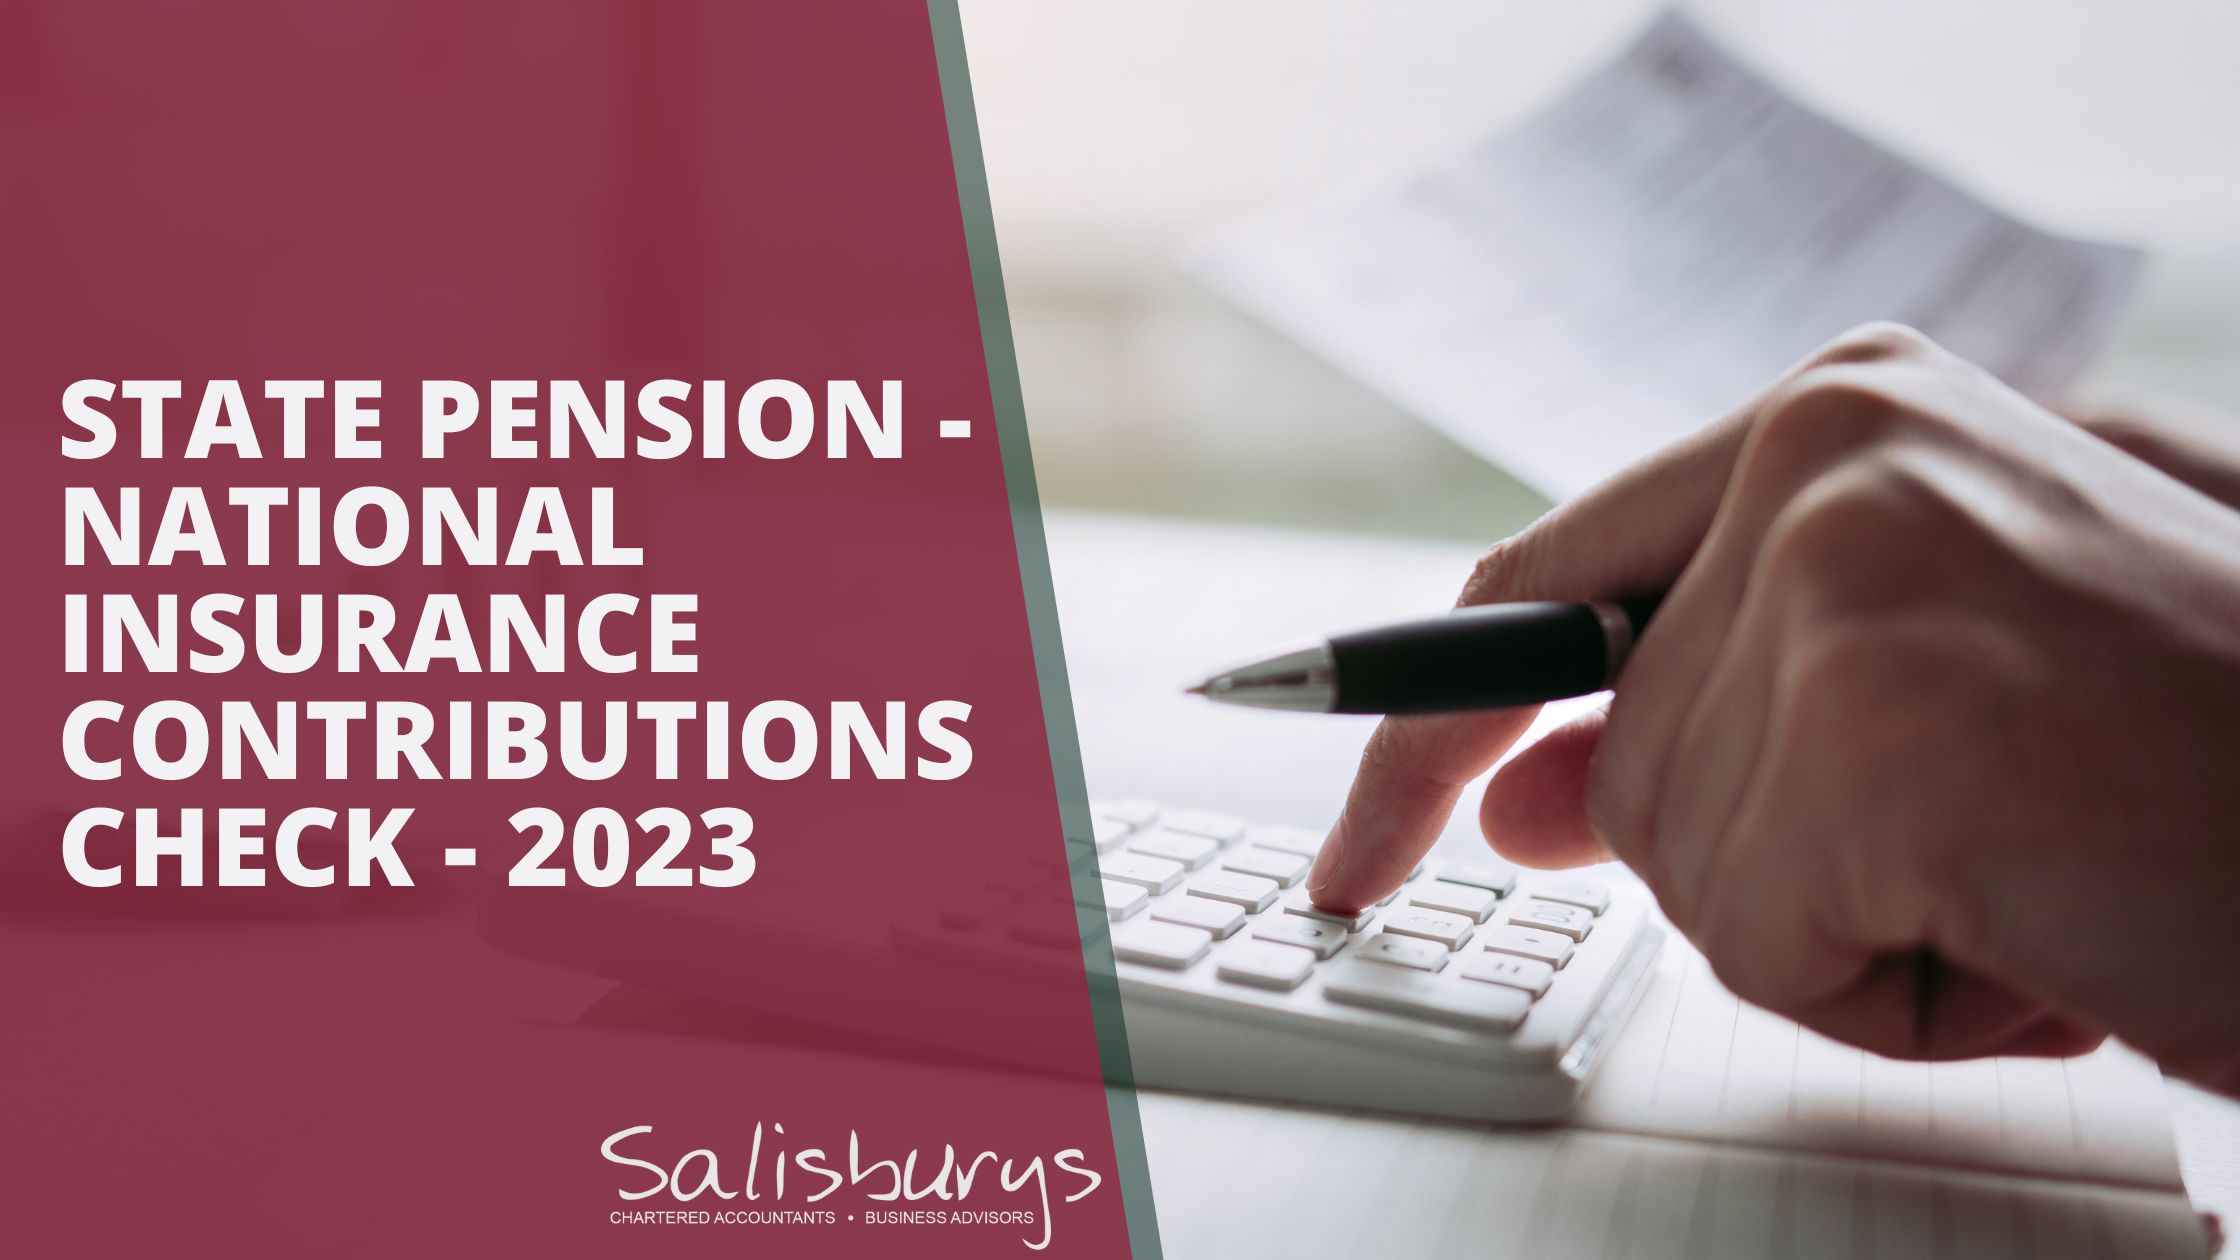 State Pension – National Insurance Contributions Check 2023